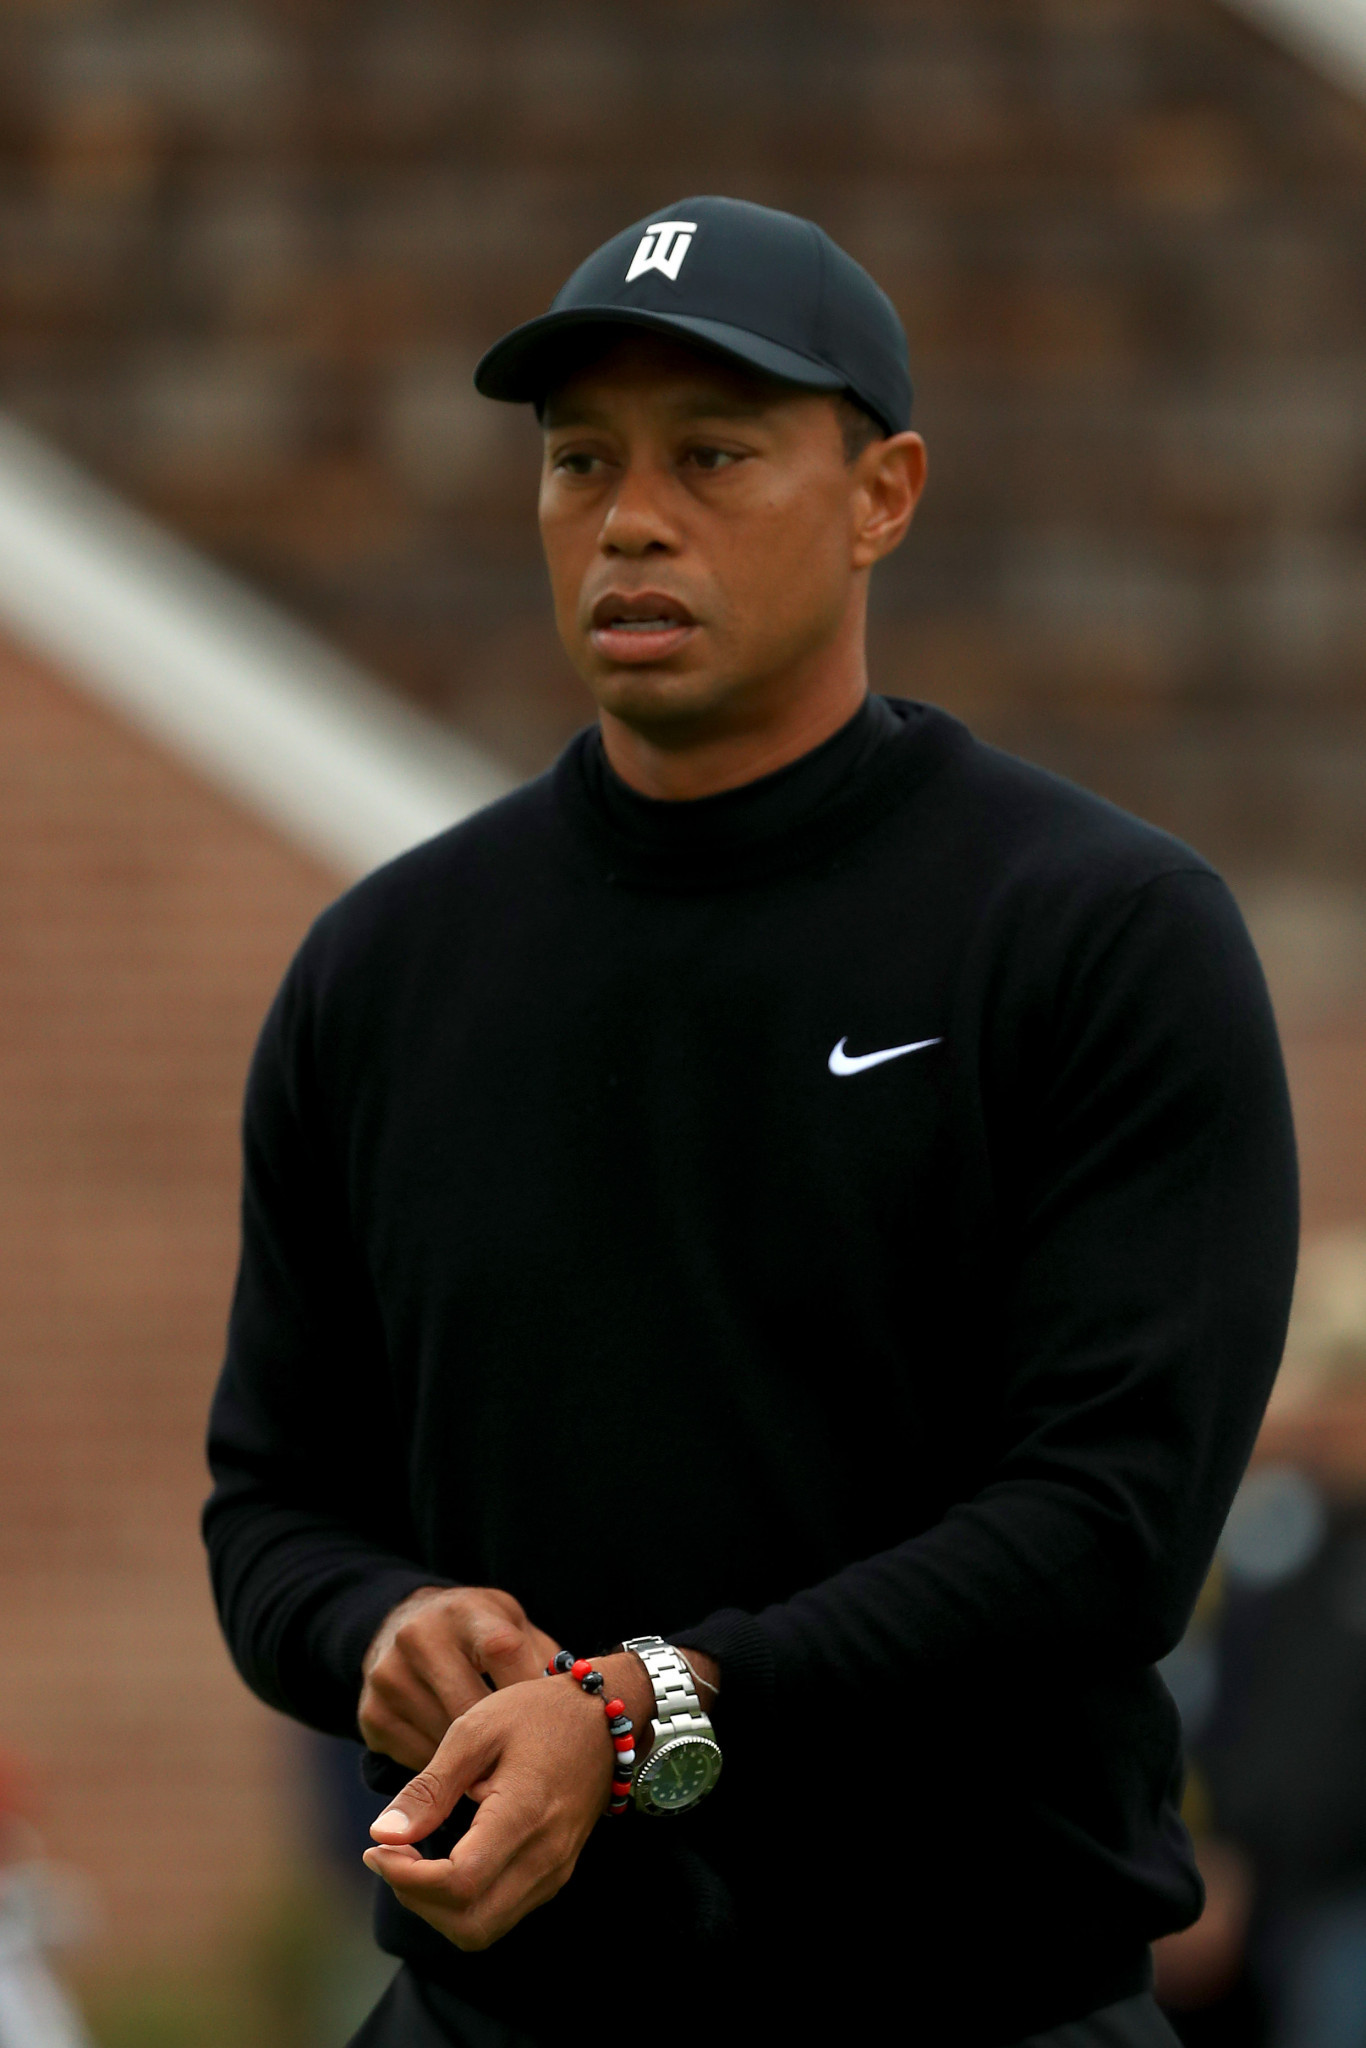 Tiger Woods said he would definitely like to play at Tokyo 2020 ©Getty Images